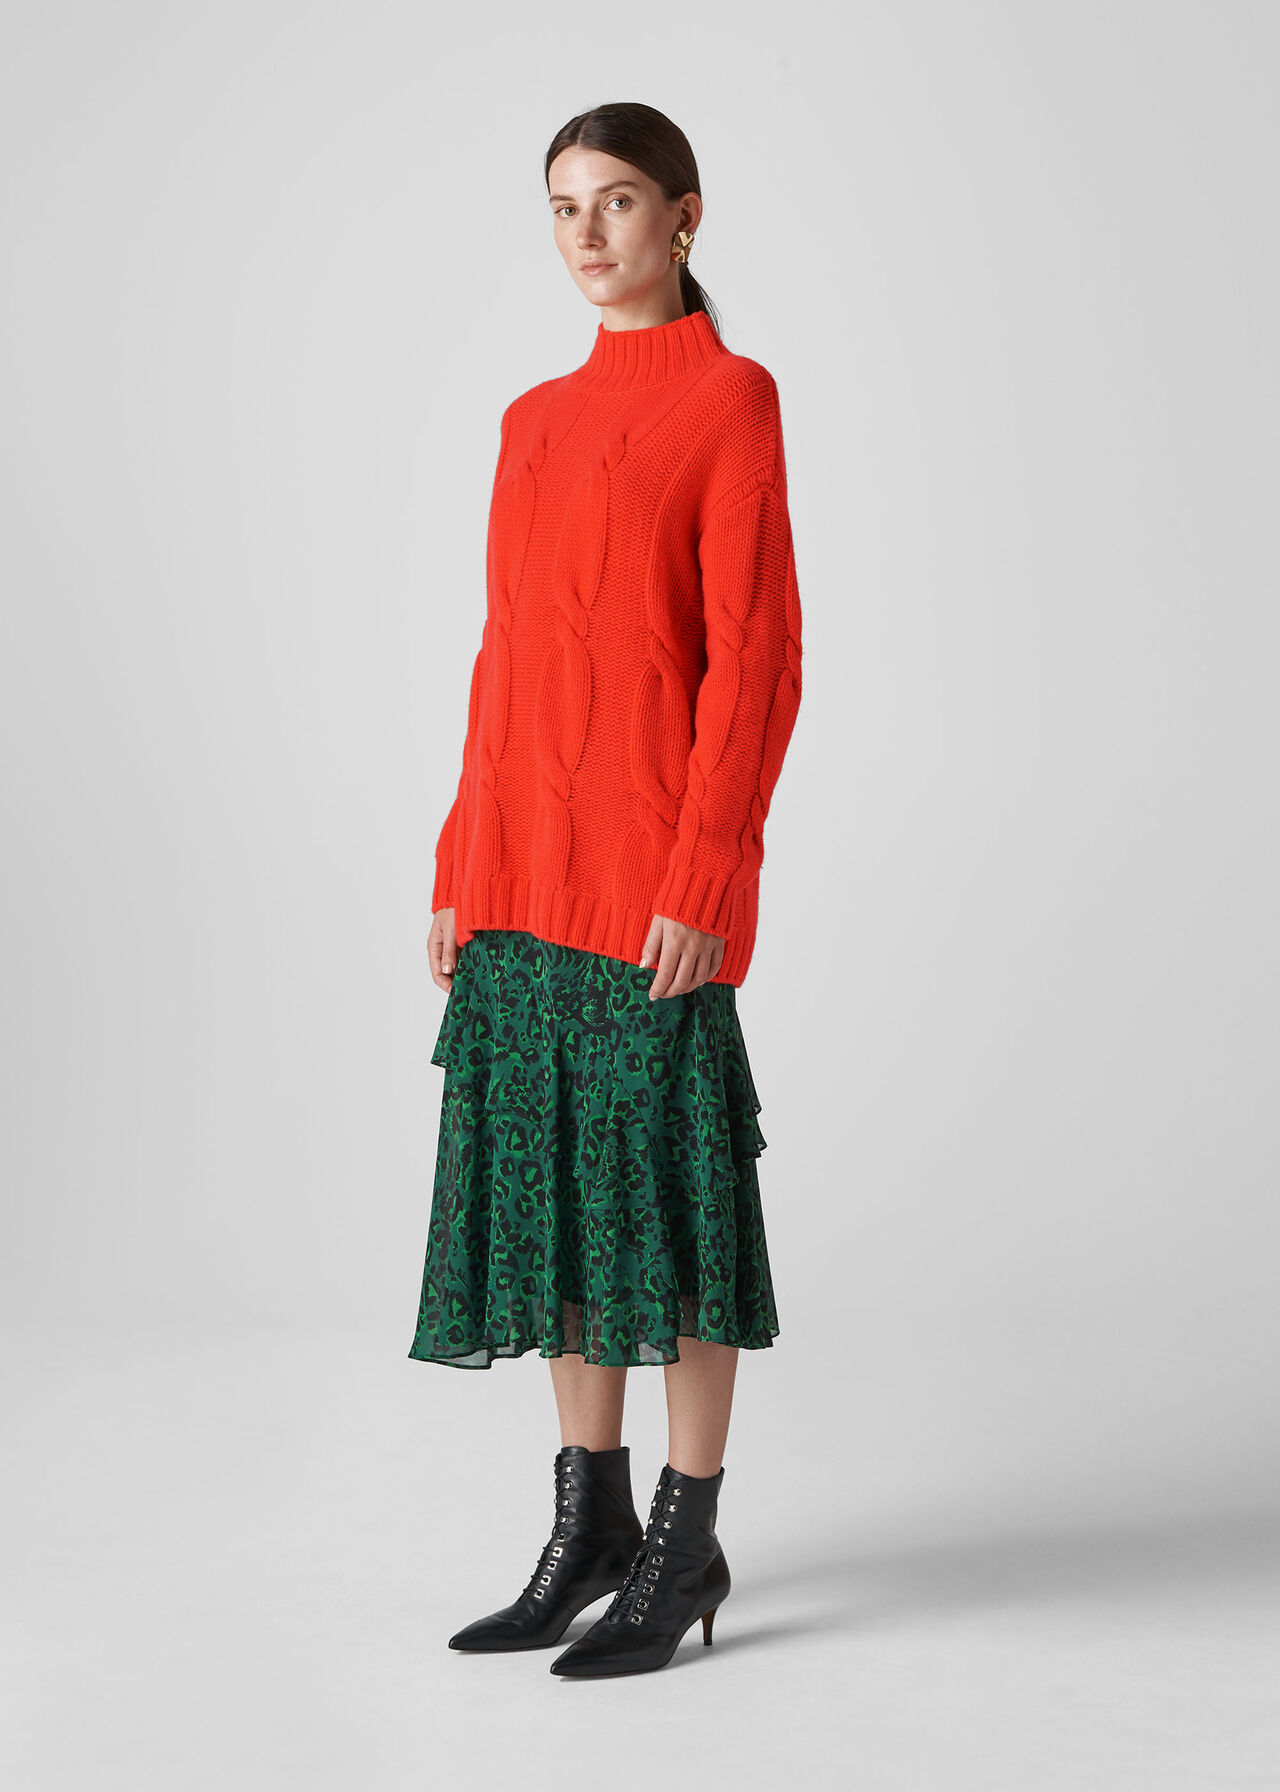 Cashmere Cable Knit Red